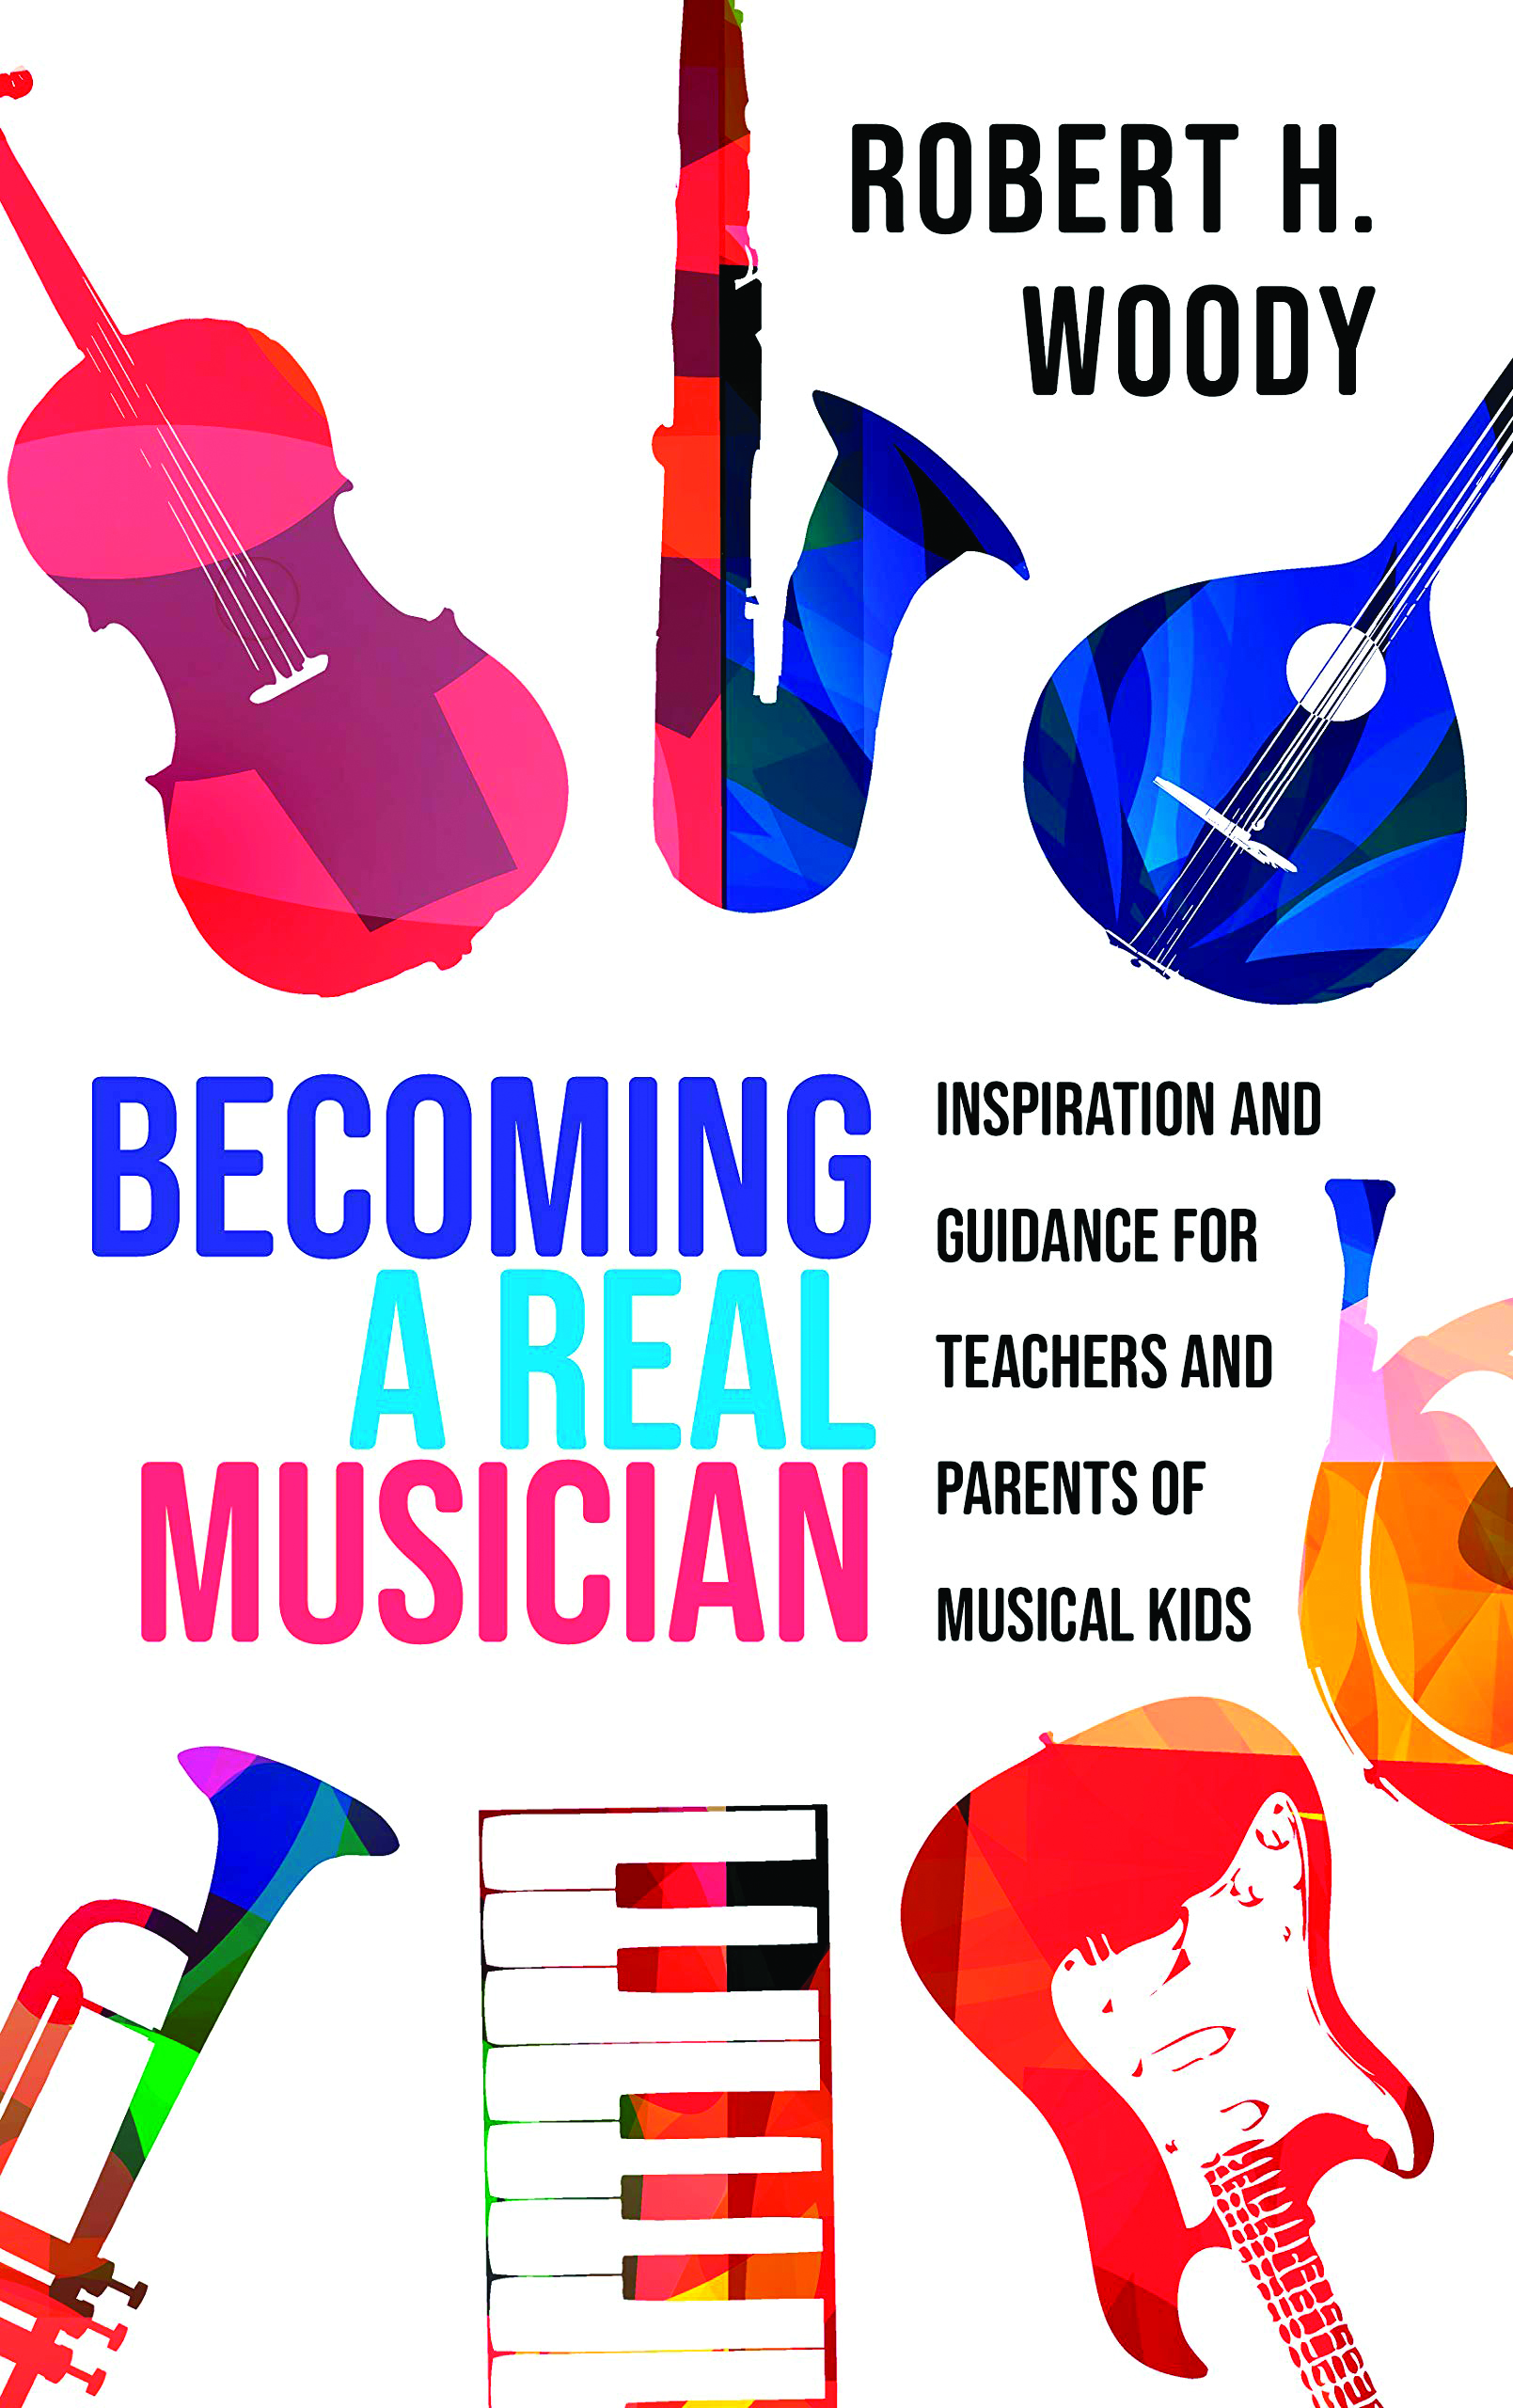 The cover of Robert Woody’s new book, “Becoming a Real Musician:  Inspiration and Guidance for Teachers and Parents of Musical Kids,” which affirms the idea that children become musical through appropriate musical experiences that are supported by the adu